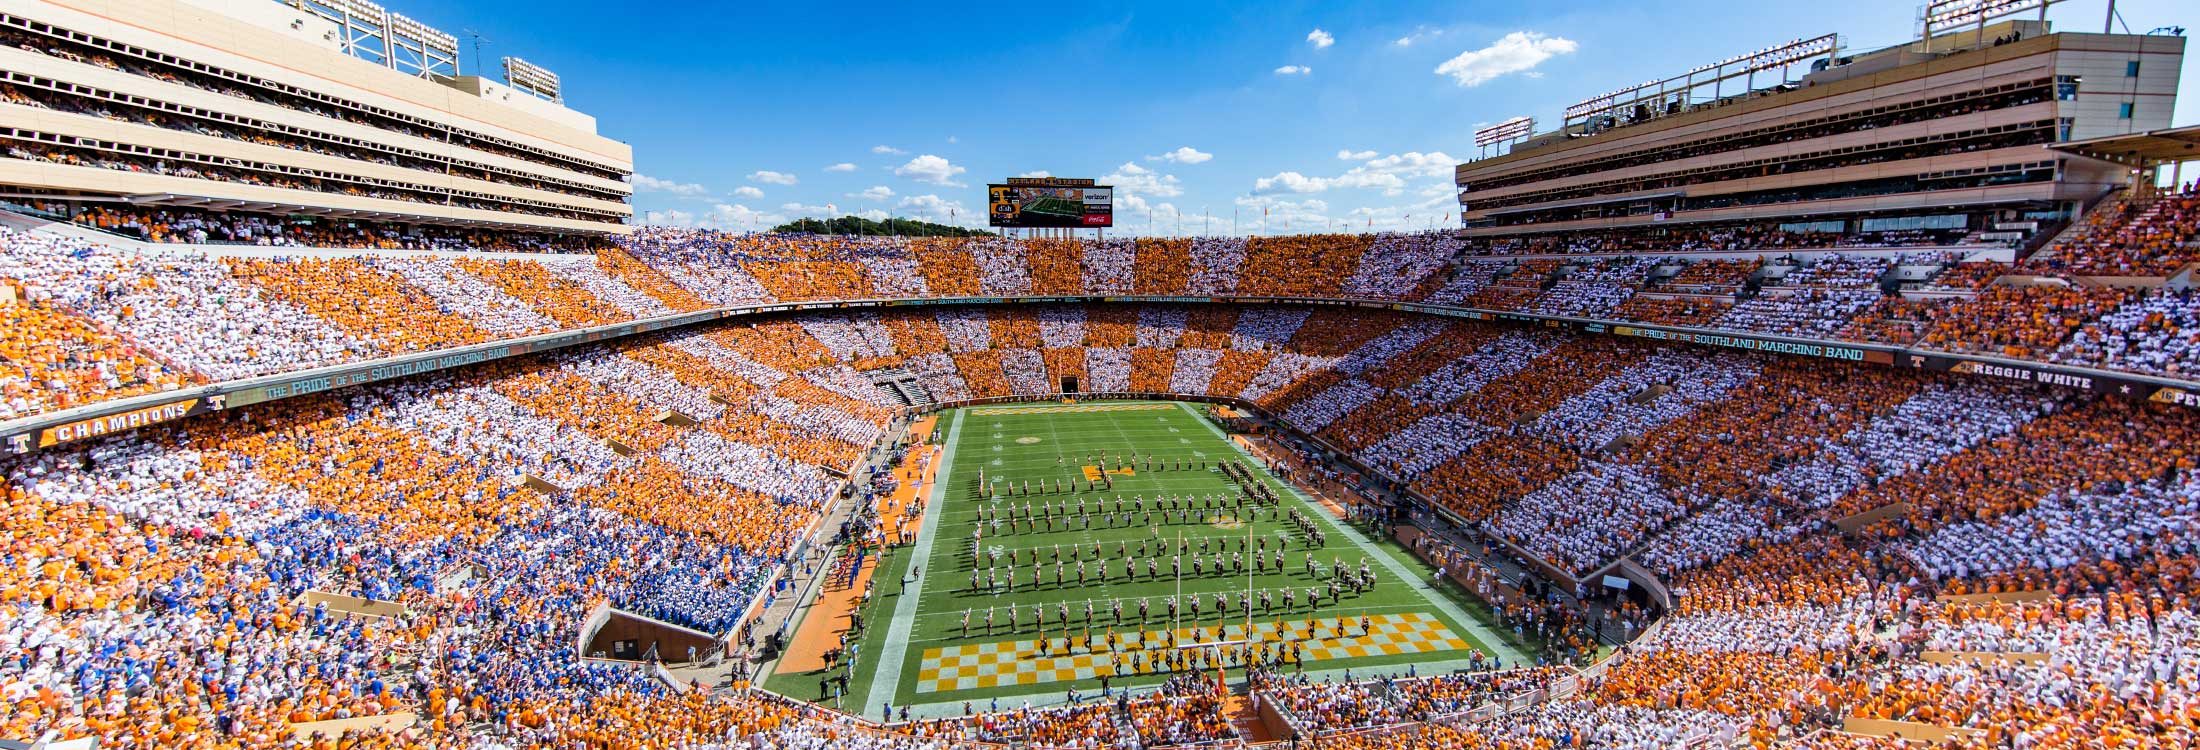 Neyland Stadium filled with Vol fans